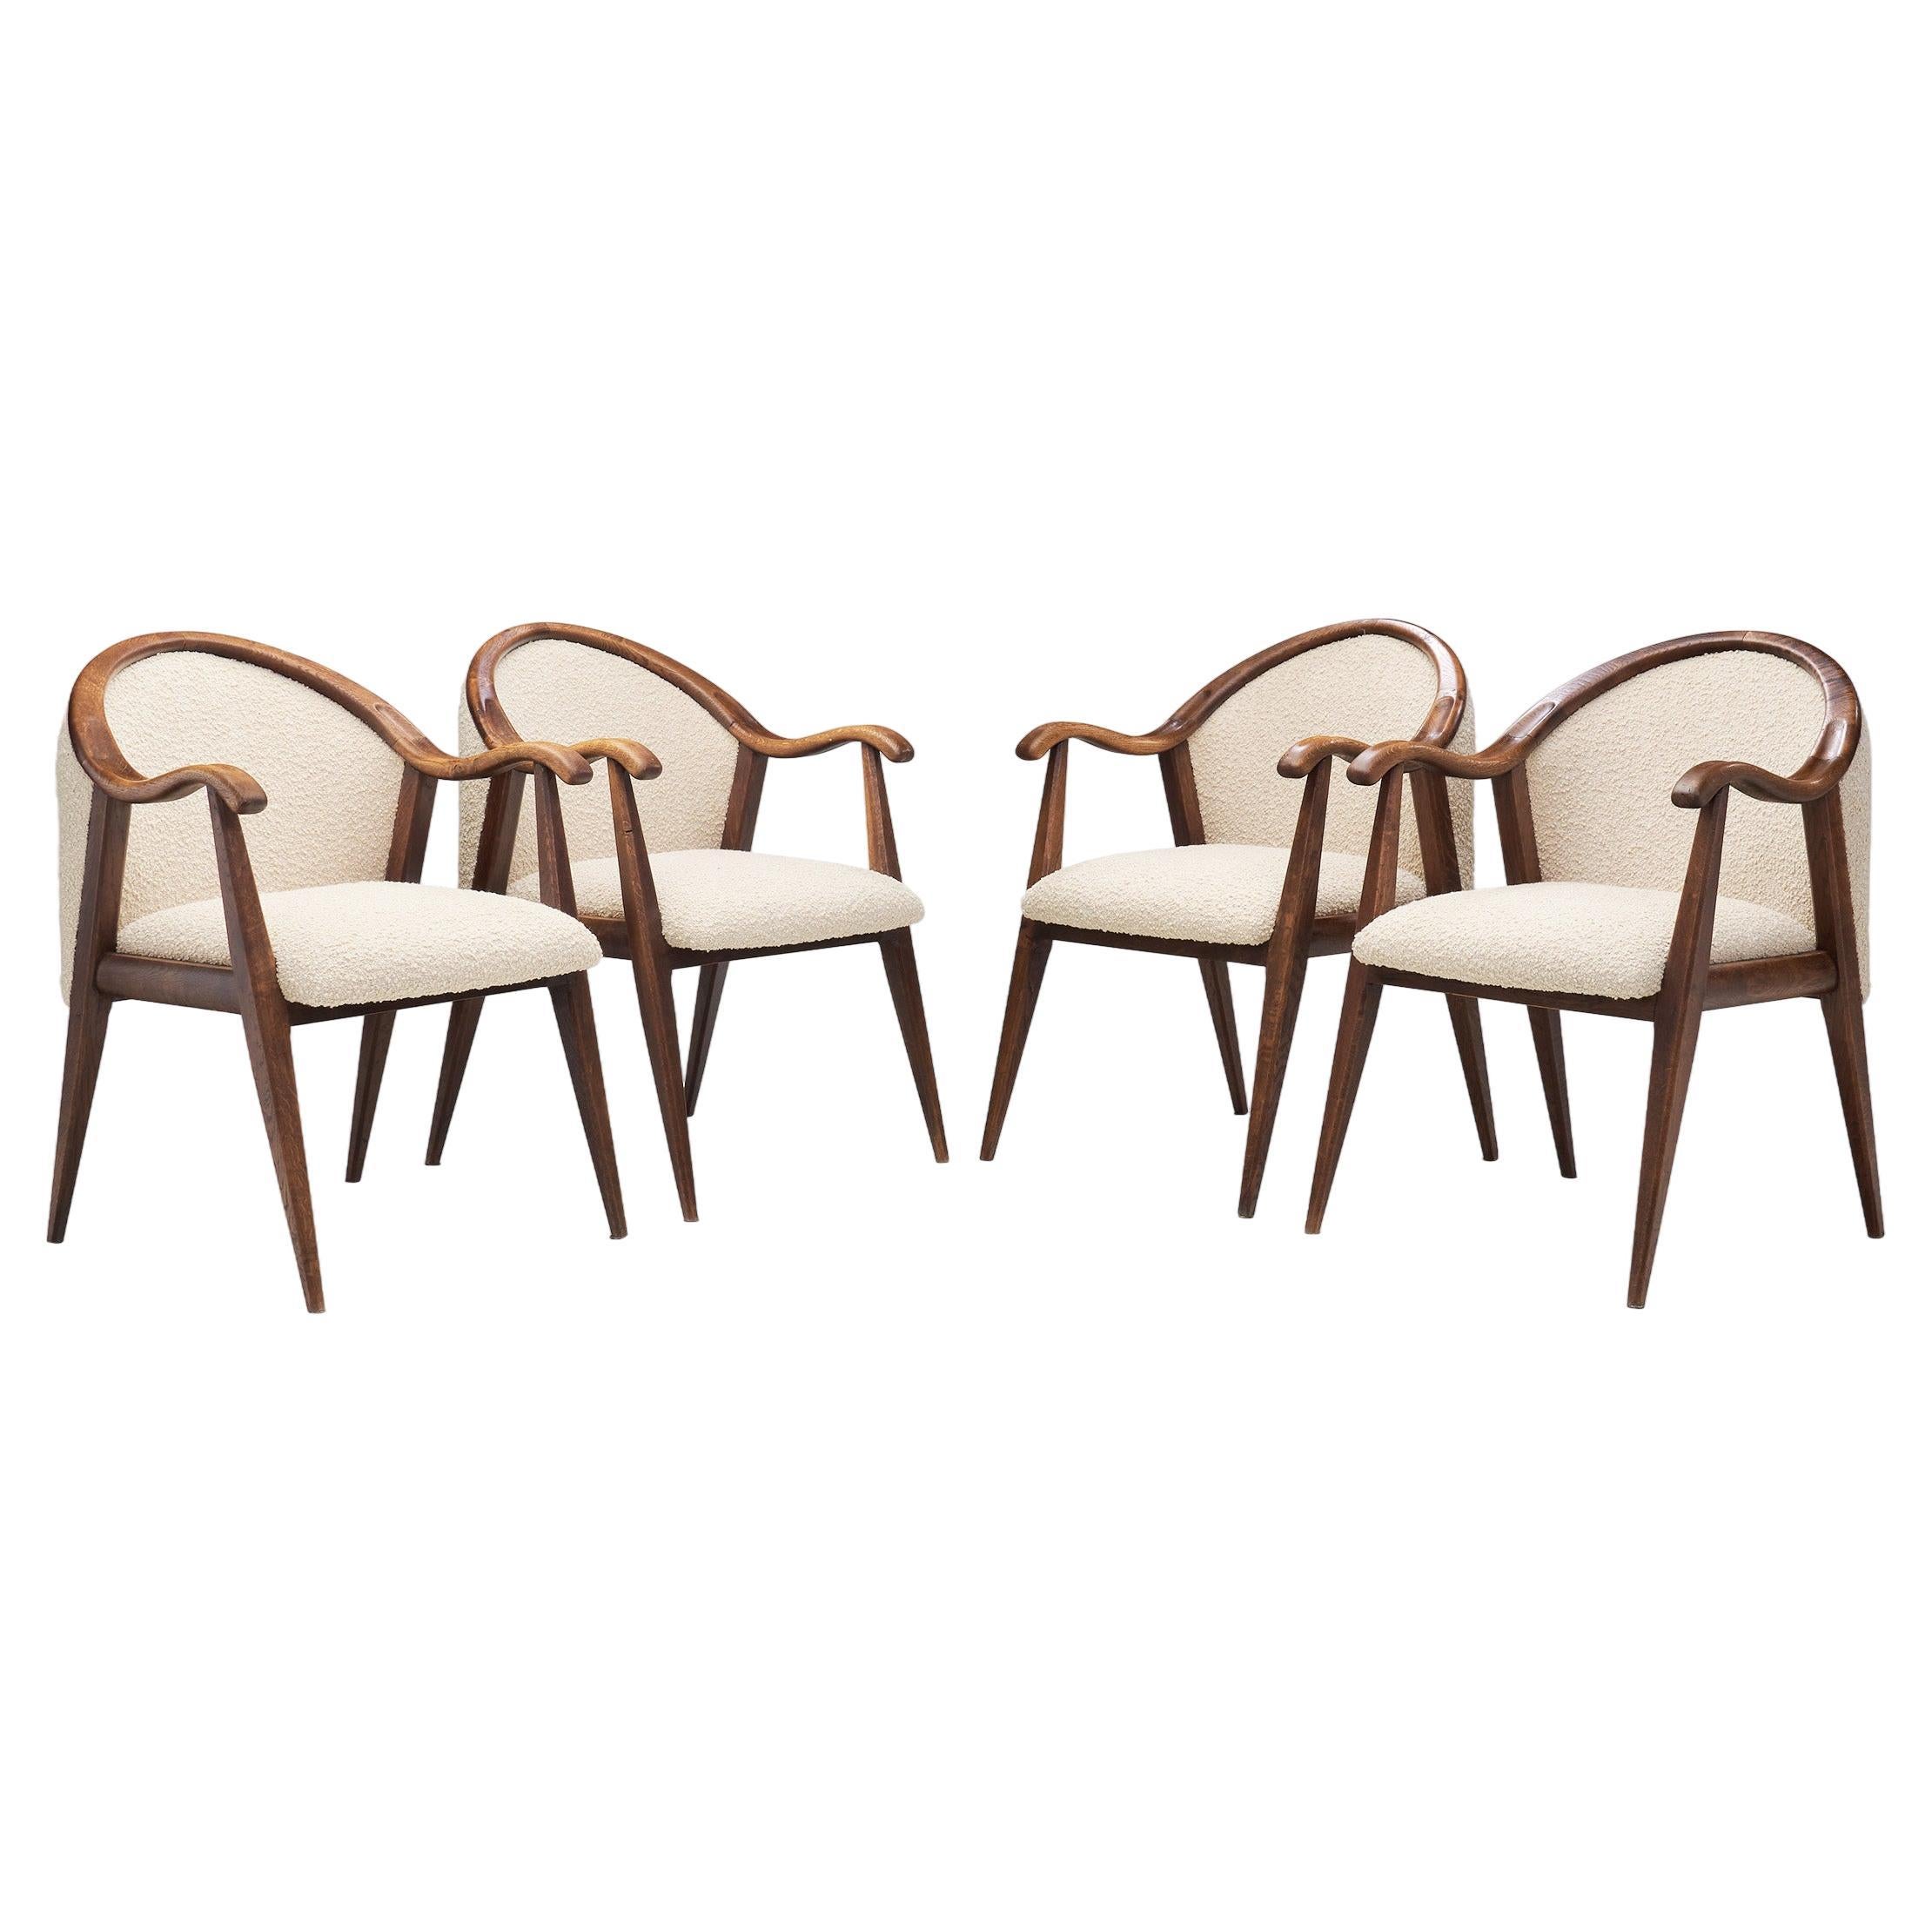 French Oak Art Deco Chairs in Taupe Bouclé, France 1930s For Sale